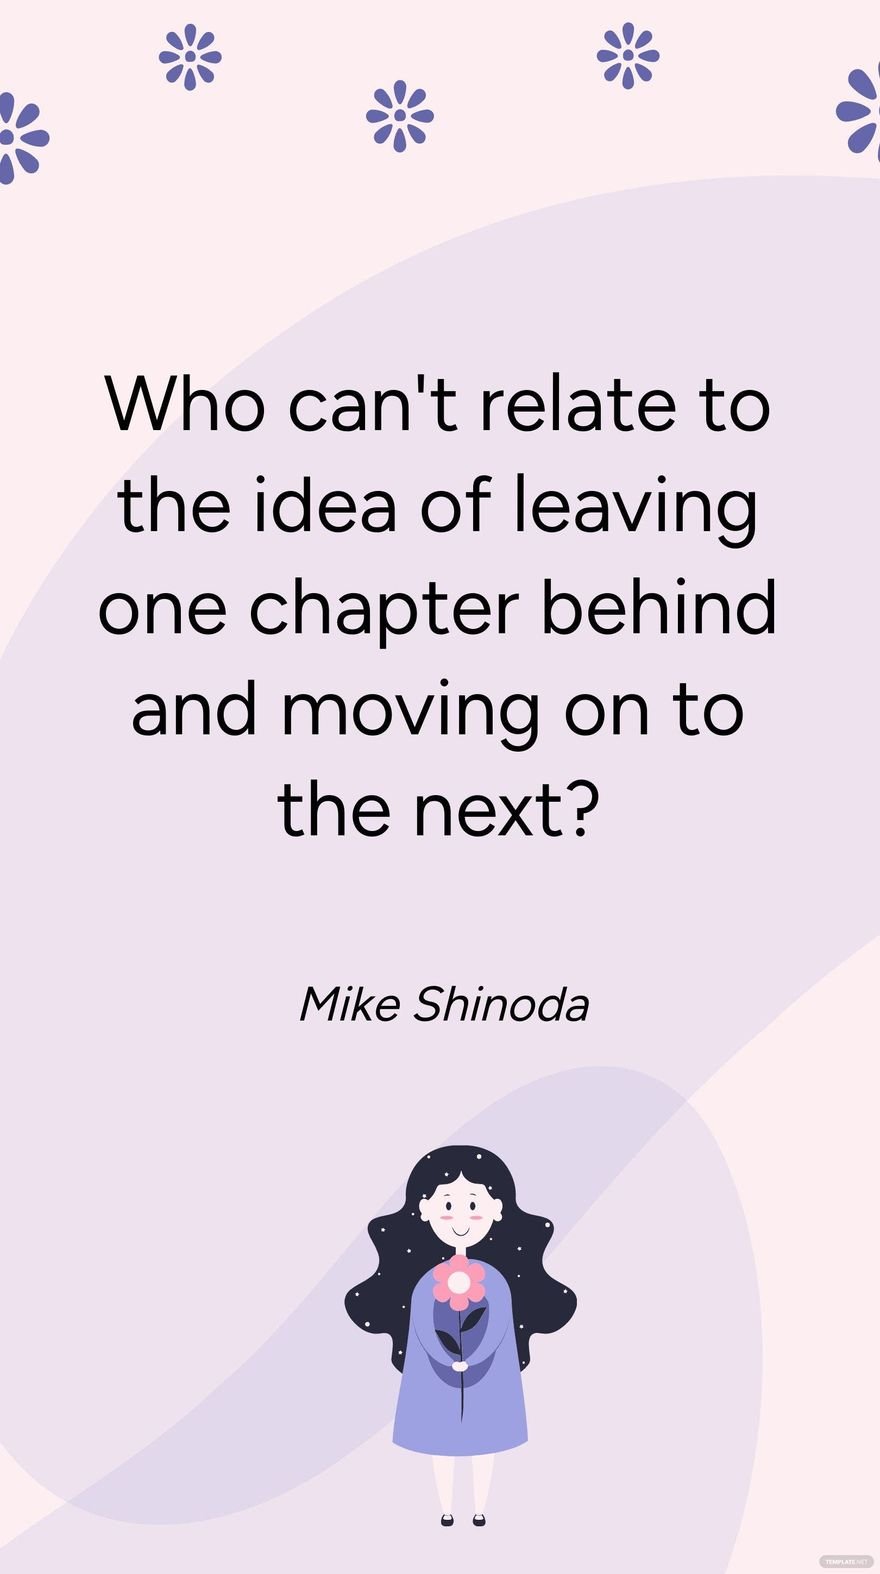 Mike Shinoda - Who can't relate to the idea of leaving one chapter behind and moving on to the next?